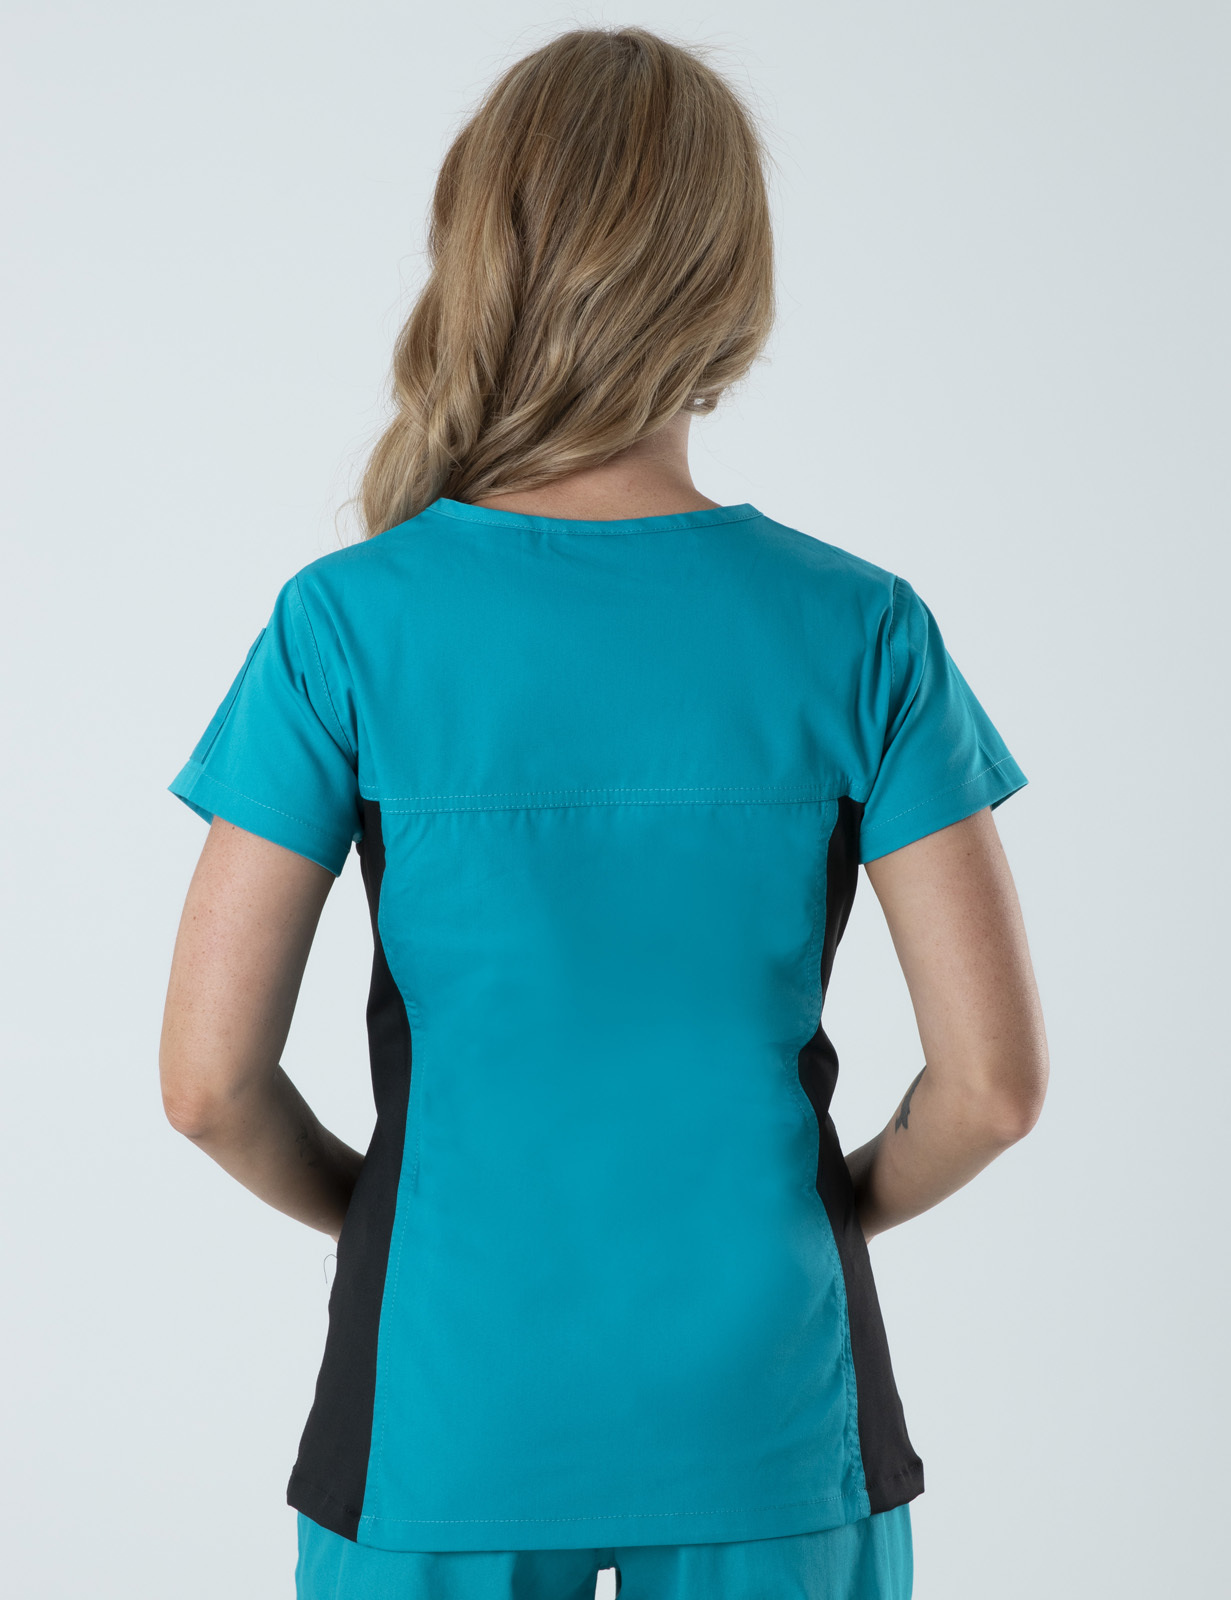 Women's Fit Solid Scrub Top With Spandex Panel - Teal - X Small - 3